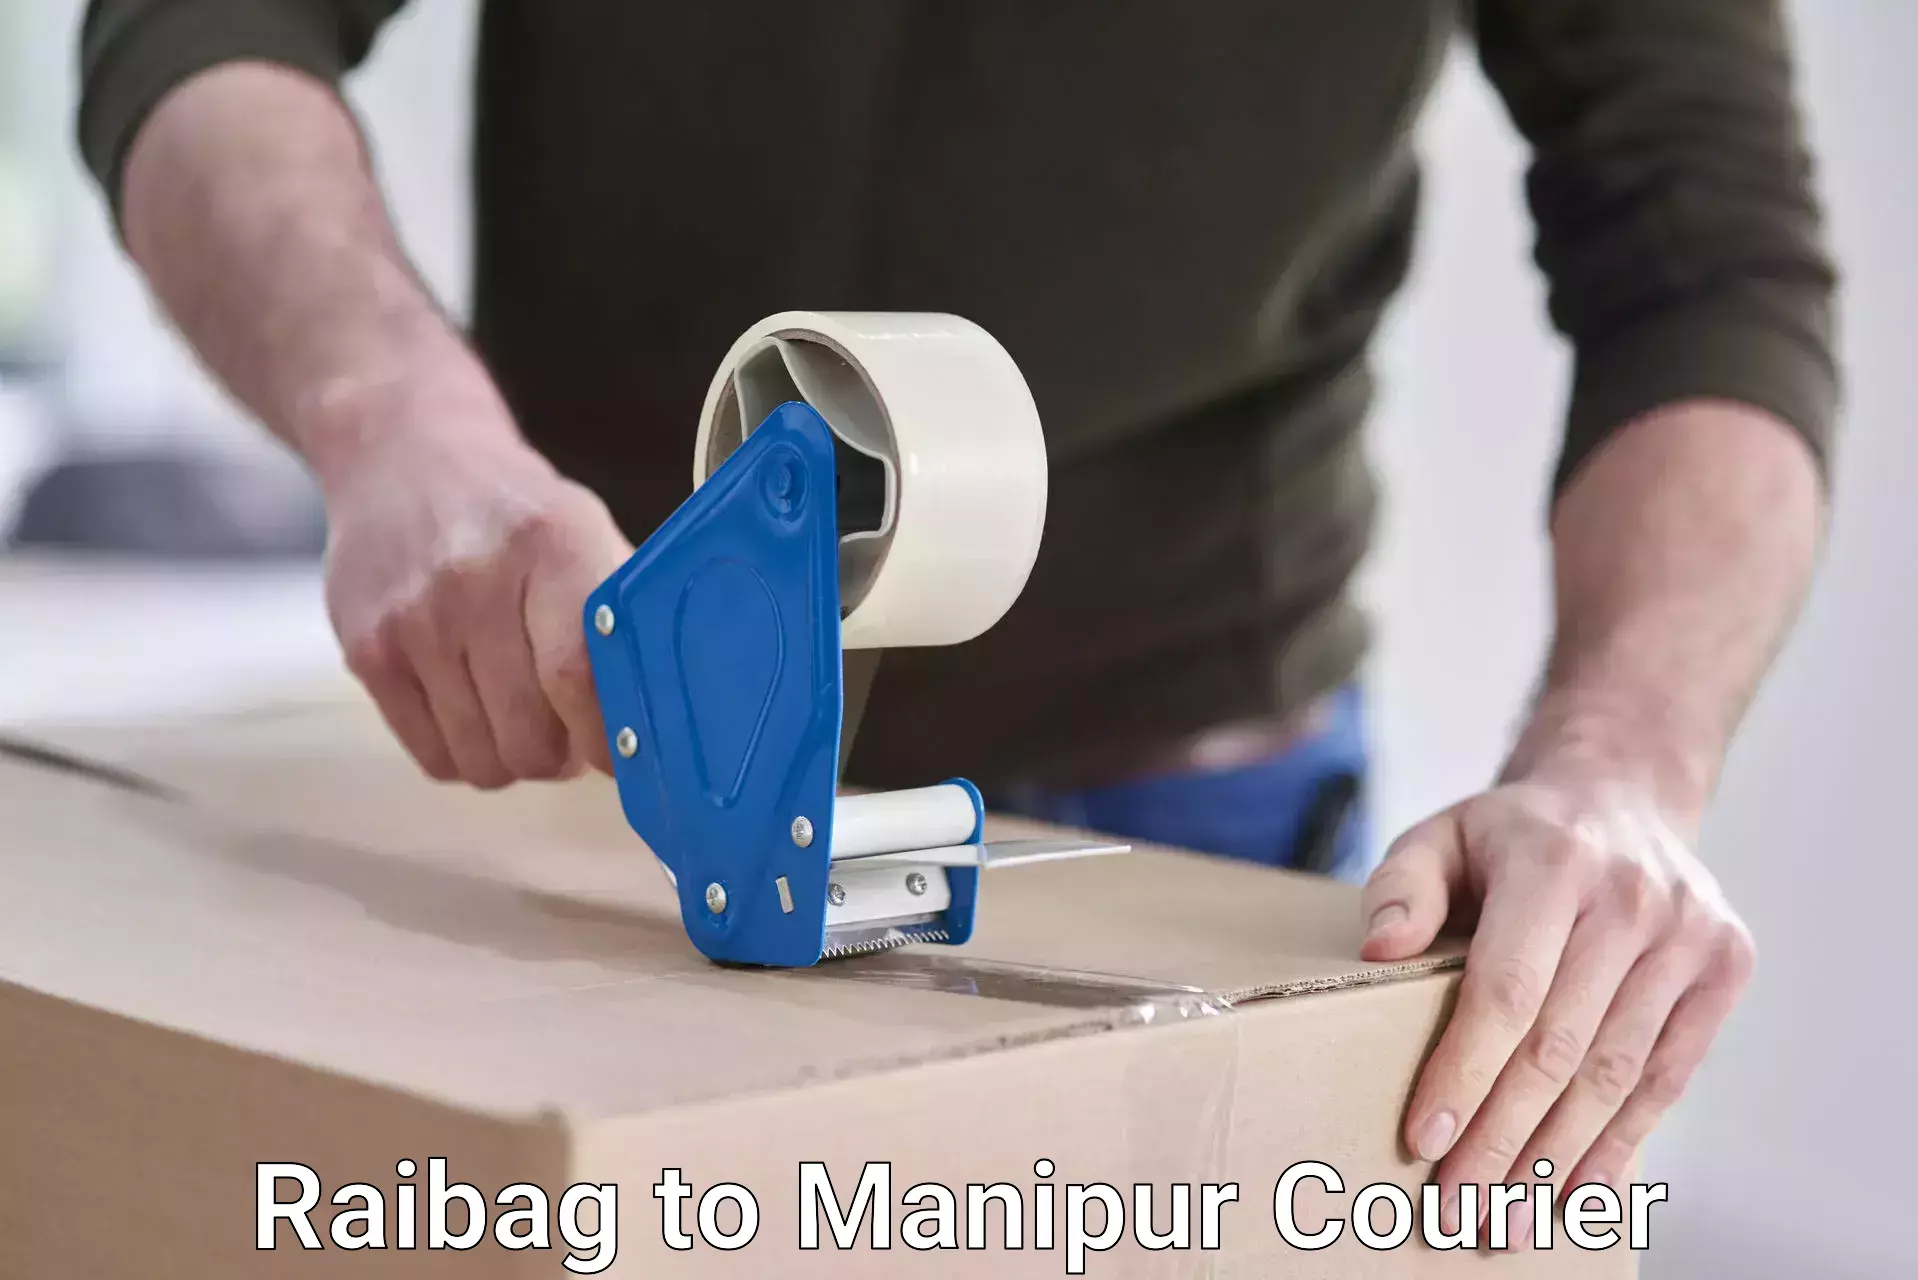 Business shipping needs Raibag to Manipur